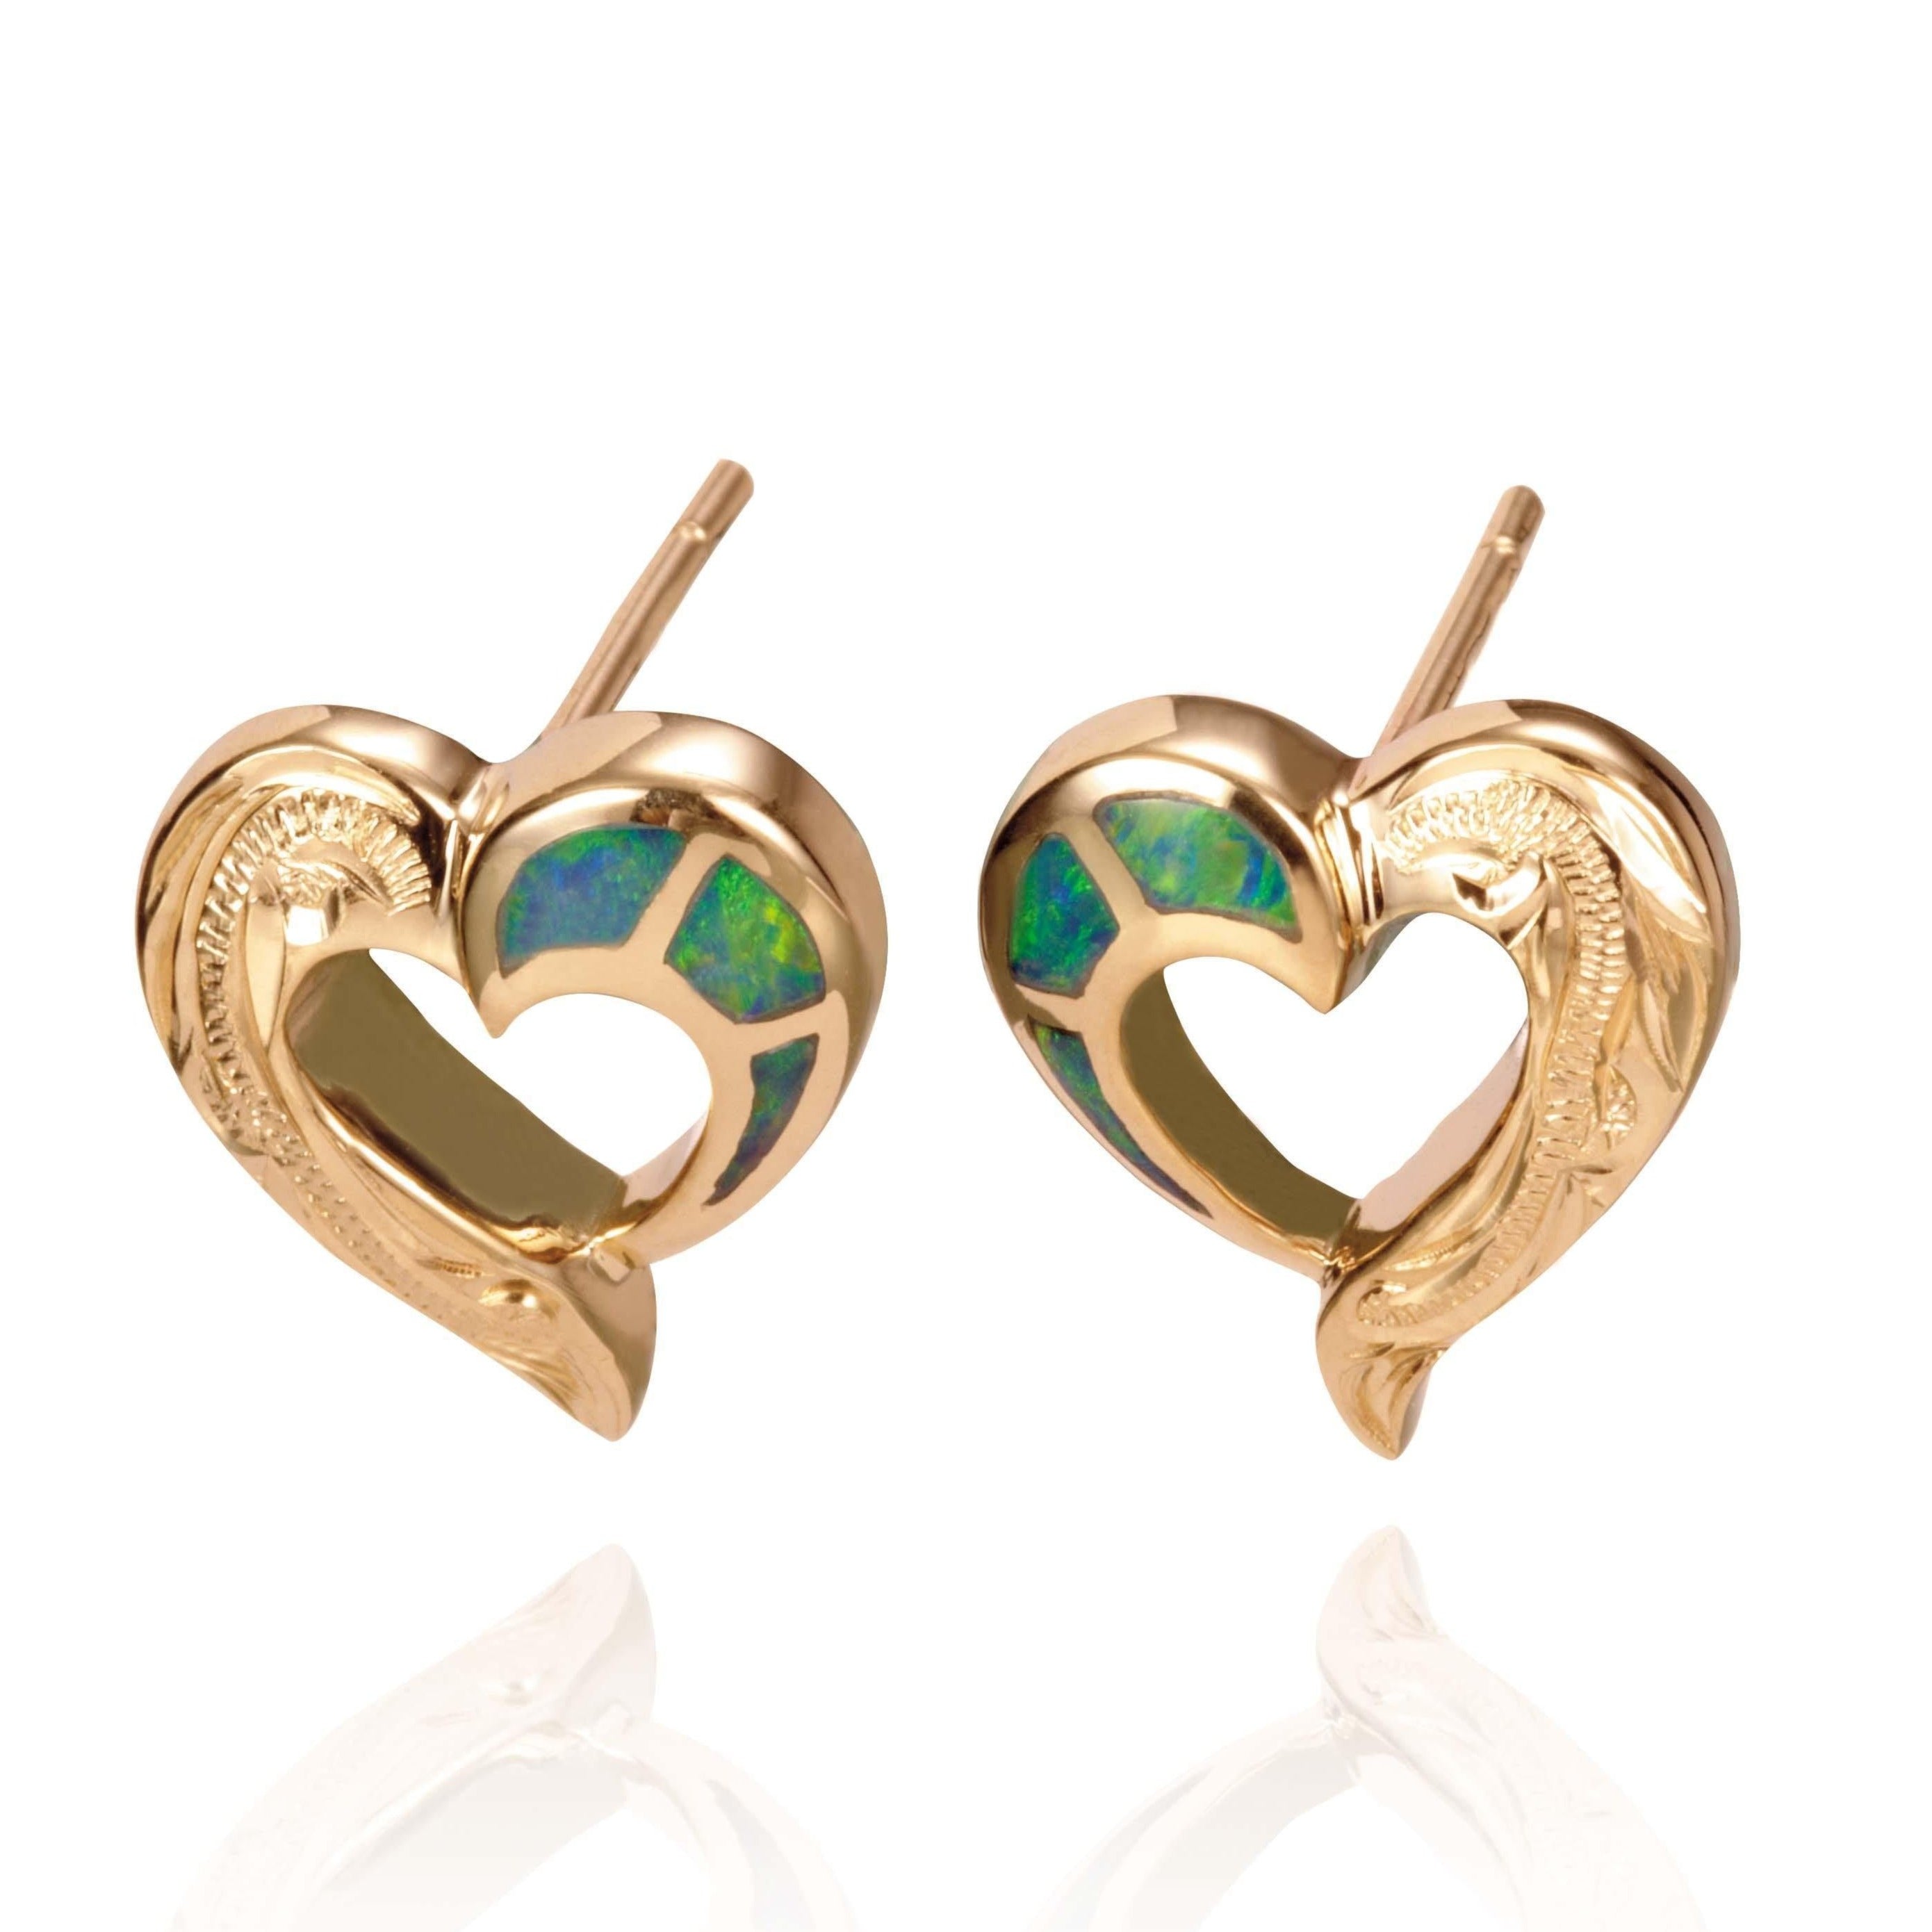 The picture shows a pair of 14K yellow gold hand-engraved stud heart earrings with opal.